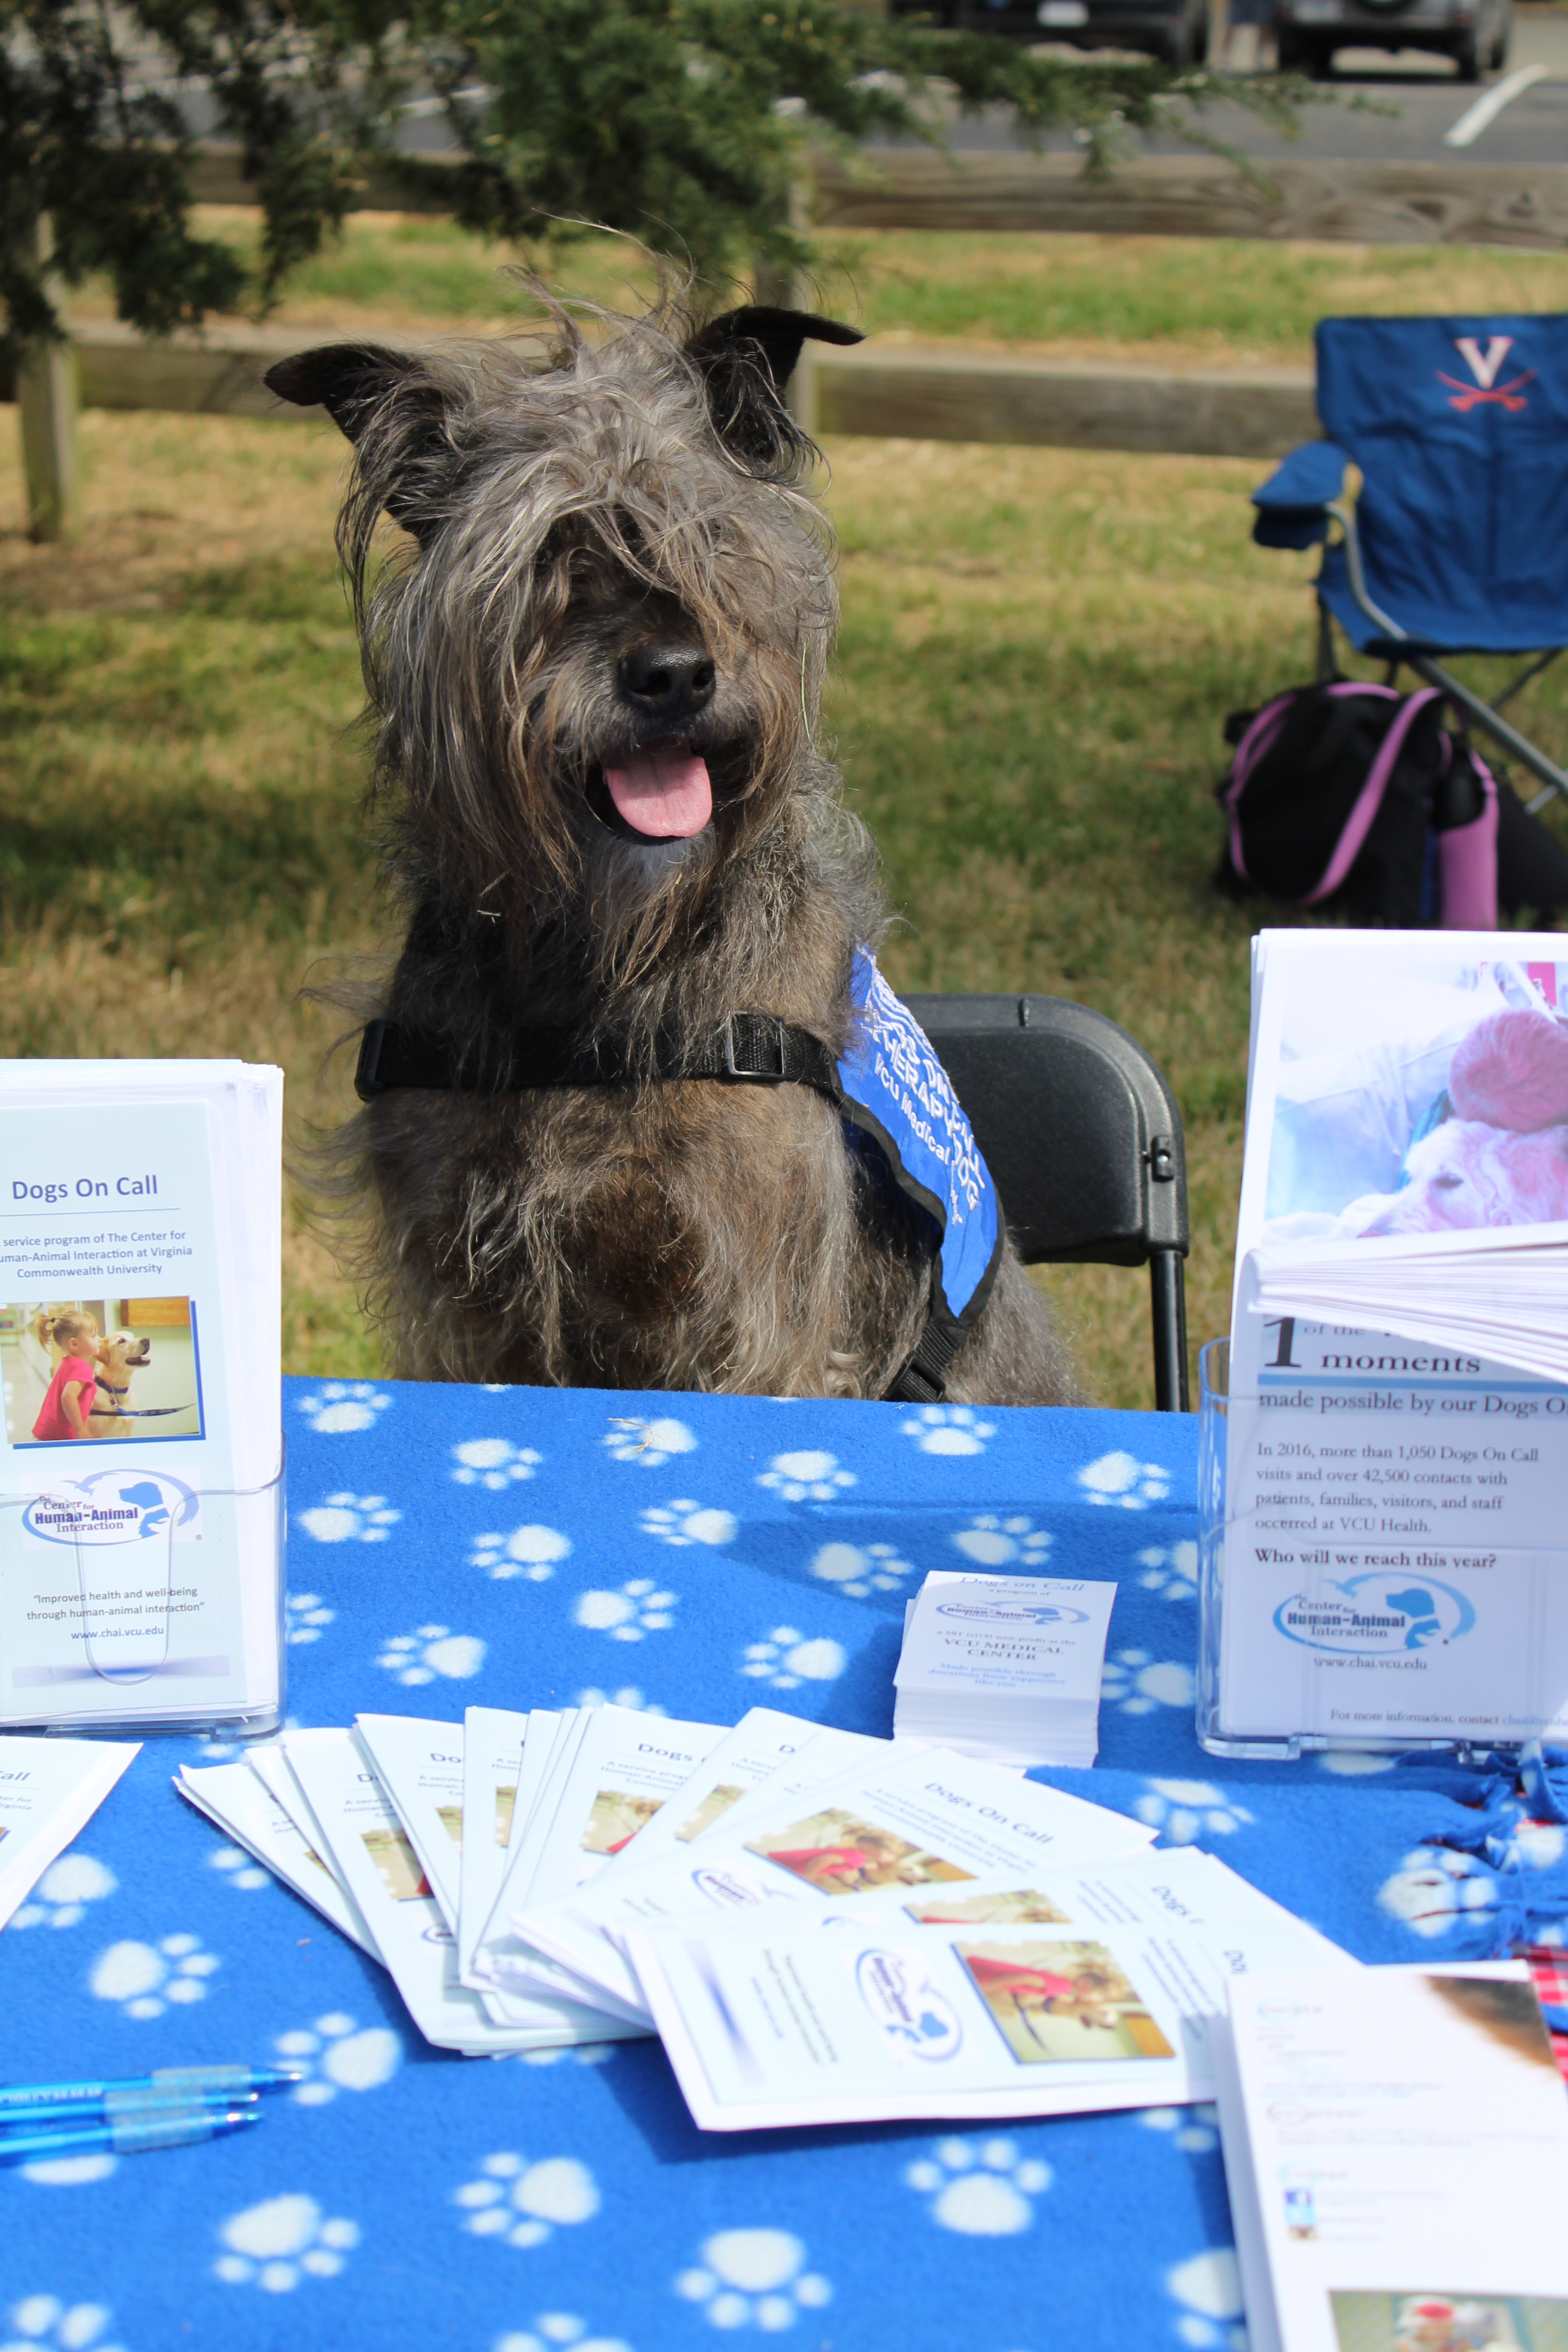 Dogs On Call therapy dog Zeke, an Irish wolfhound and terrier mix, sits at the Dogs On Call table at Maymont Children's Farm with brochures on the table in front of Zeke.